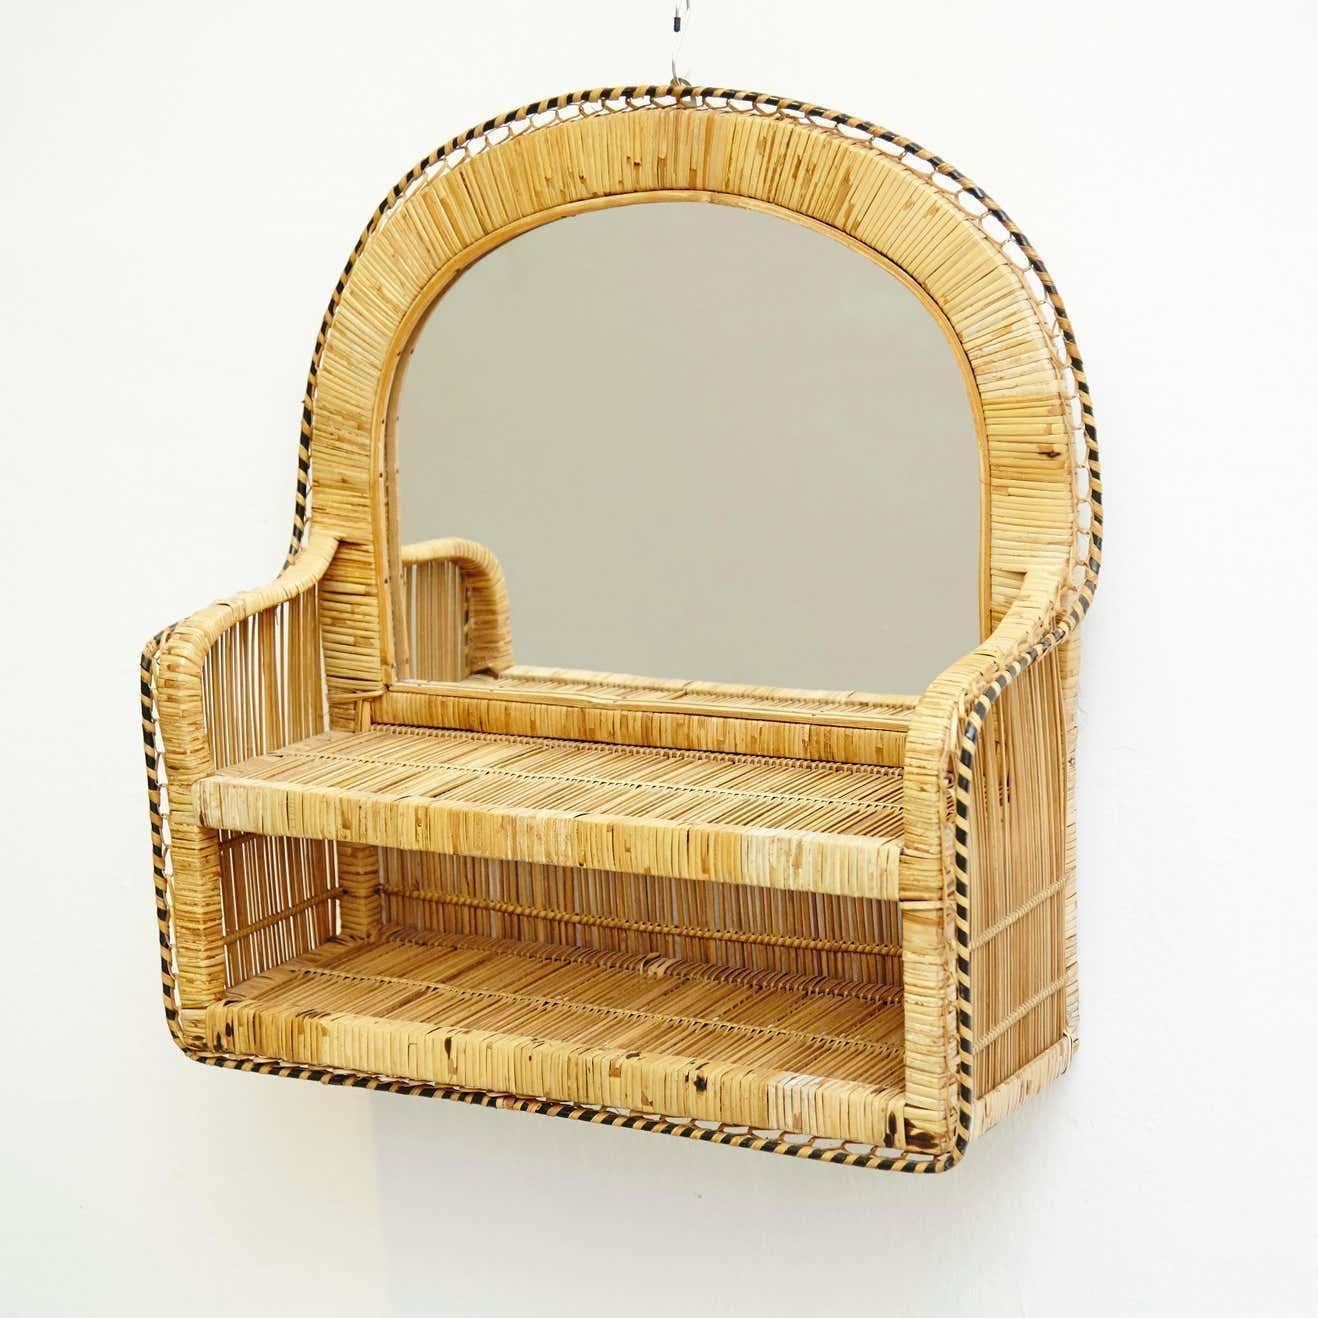 Rustic Mid-Century Modern Wall Mirror with Shelve Handcrafted in Rattan, circa 1960 For Sale